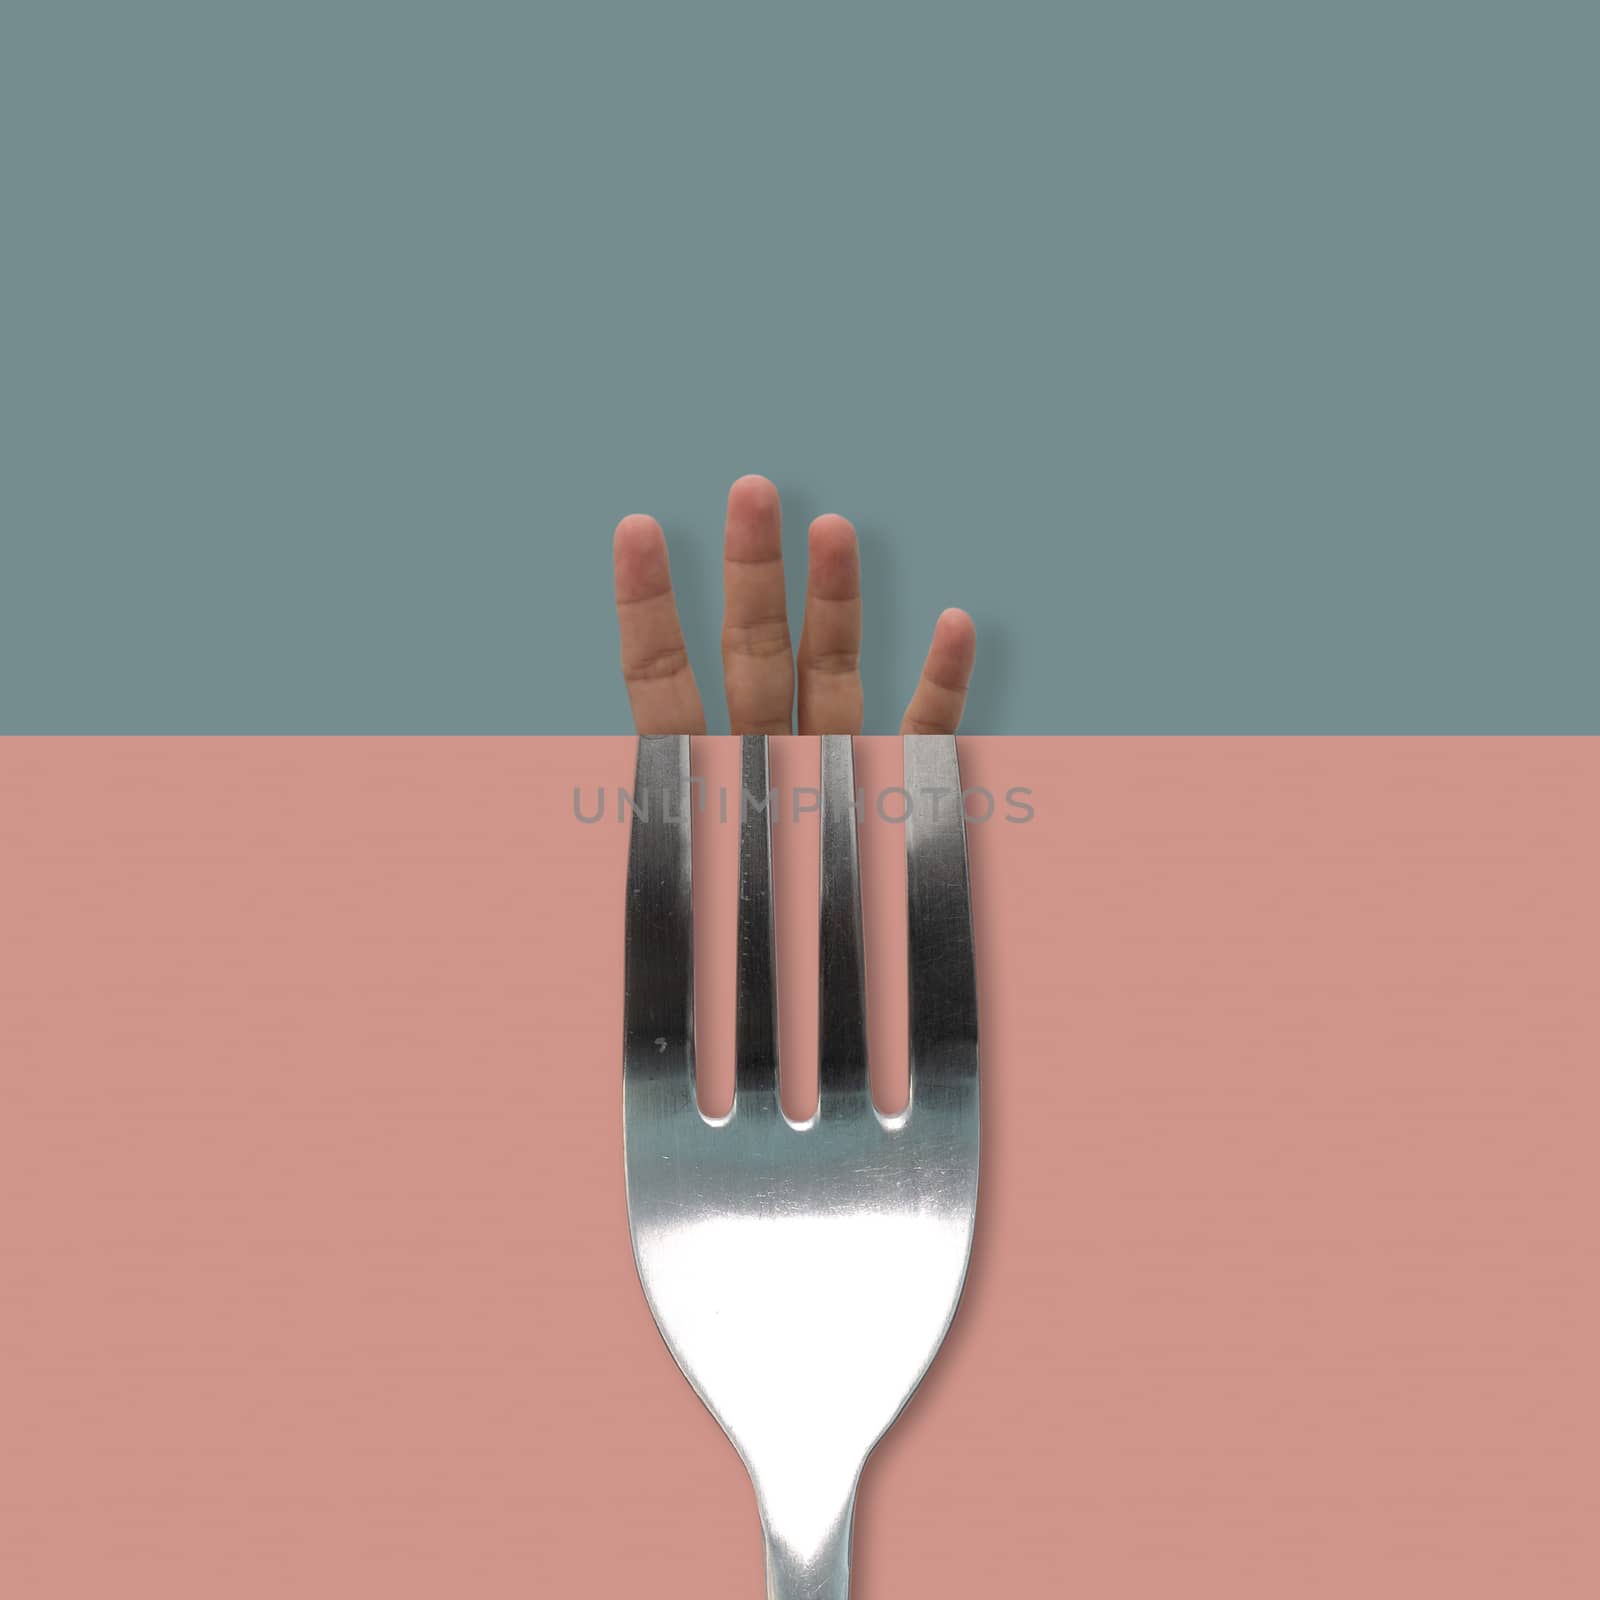 Contemporary art-hand and fork on blue, pink background, Minimal style.